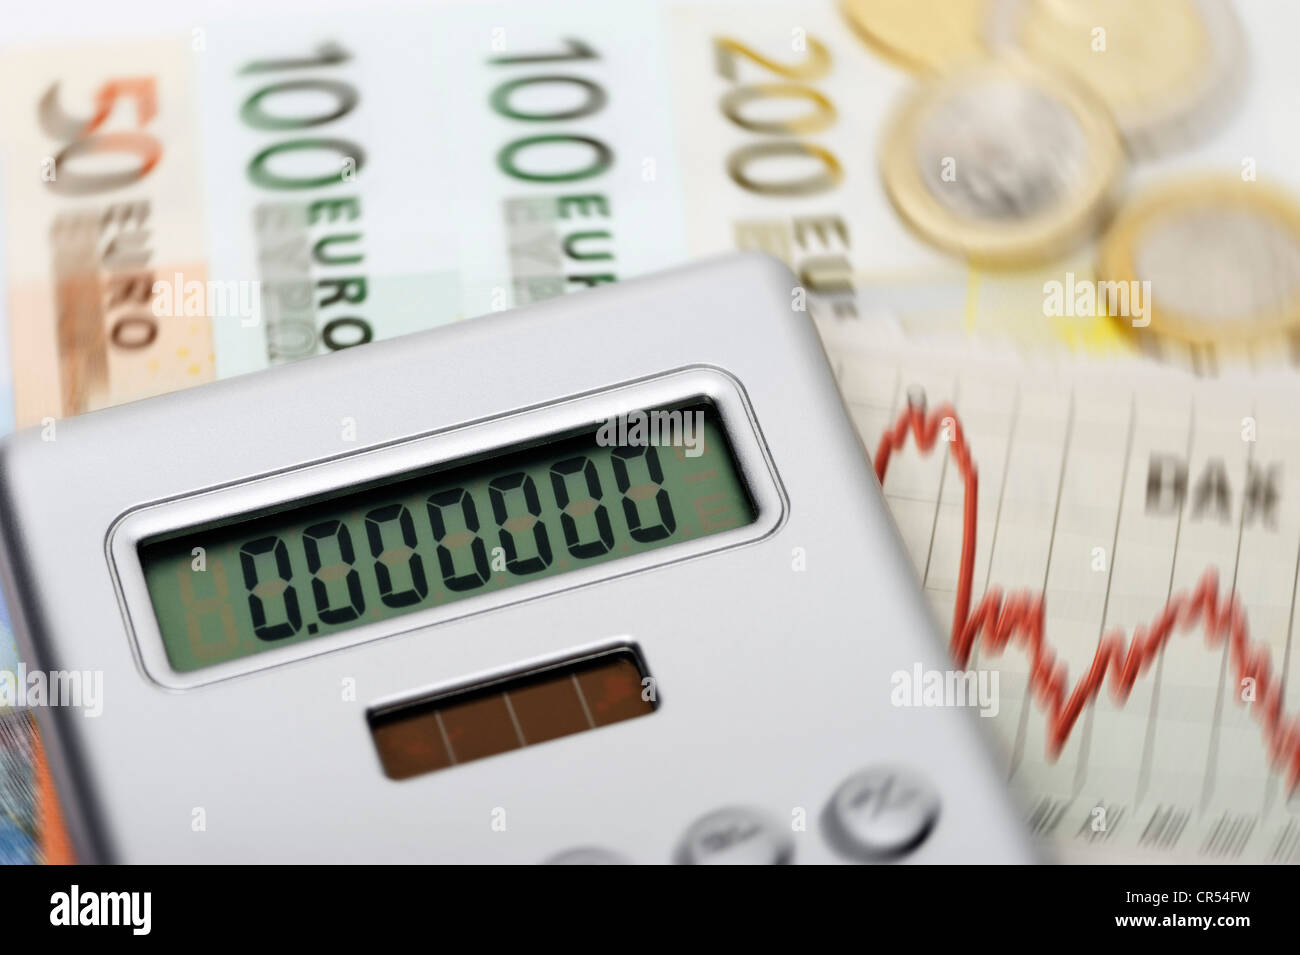 Pocket calculator displaying zeros, on Euro banknotes and an equity curve Stock Photo